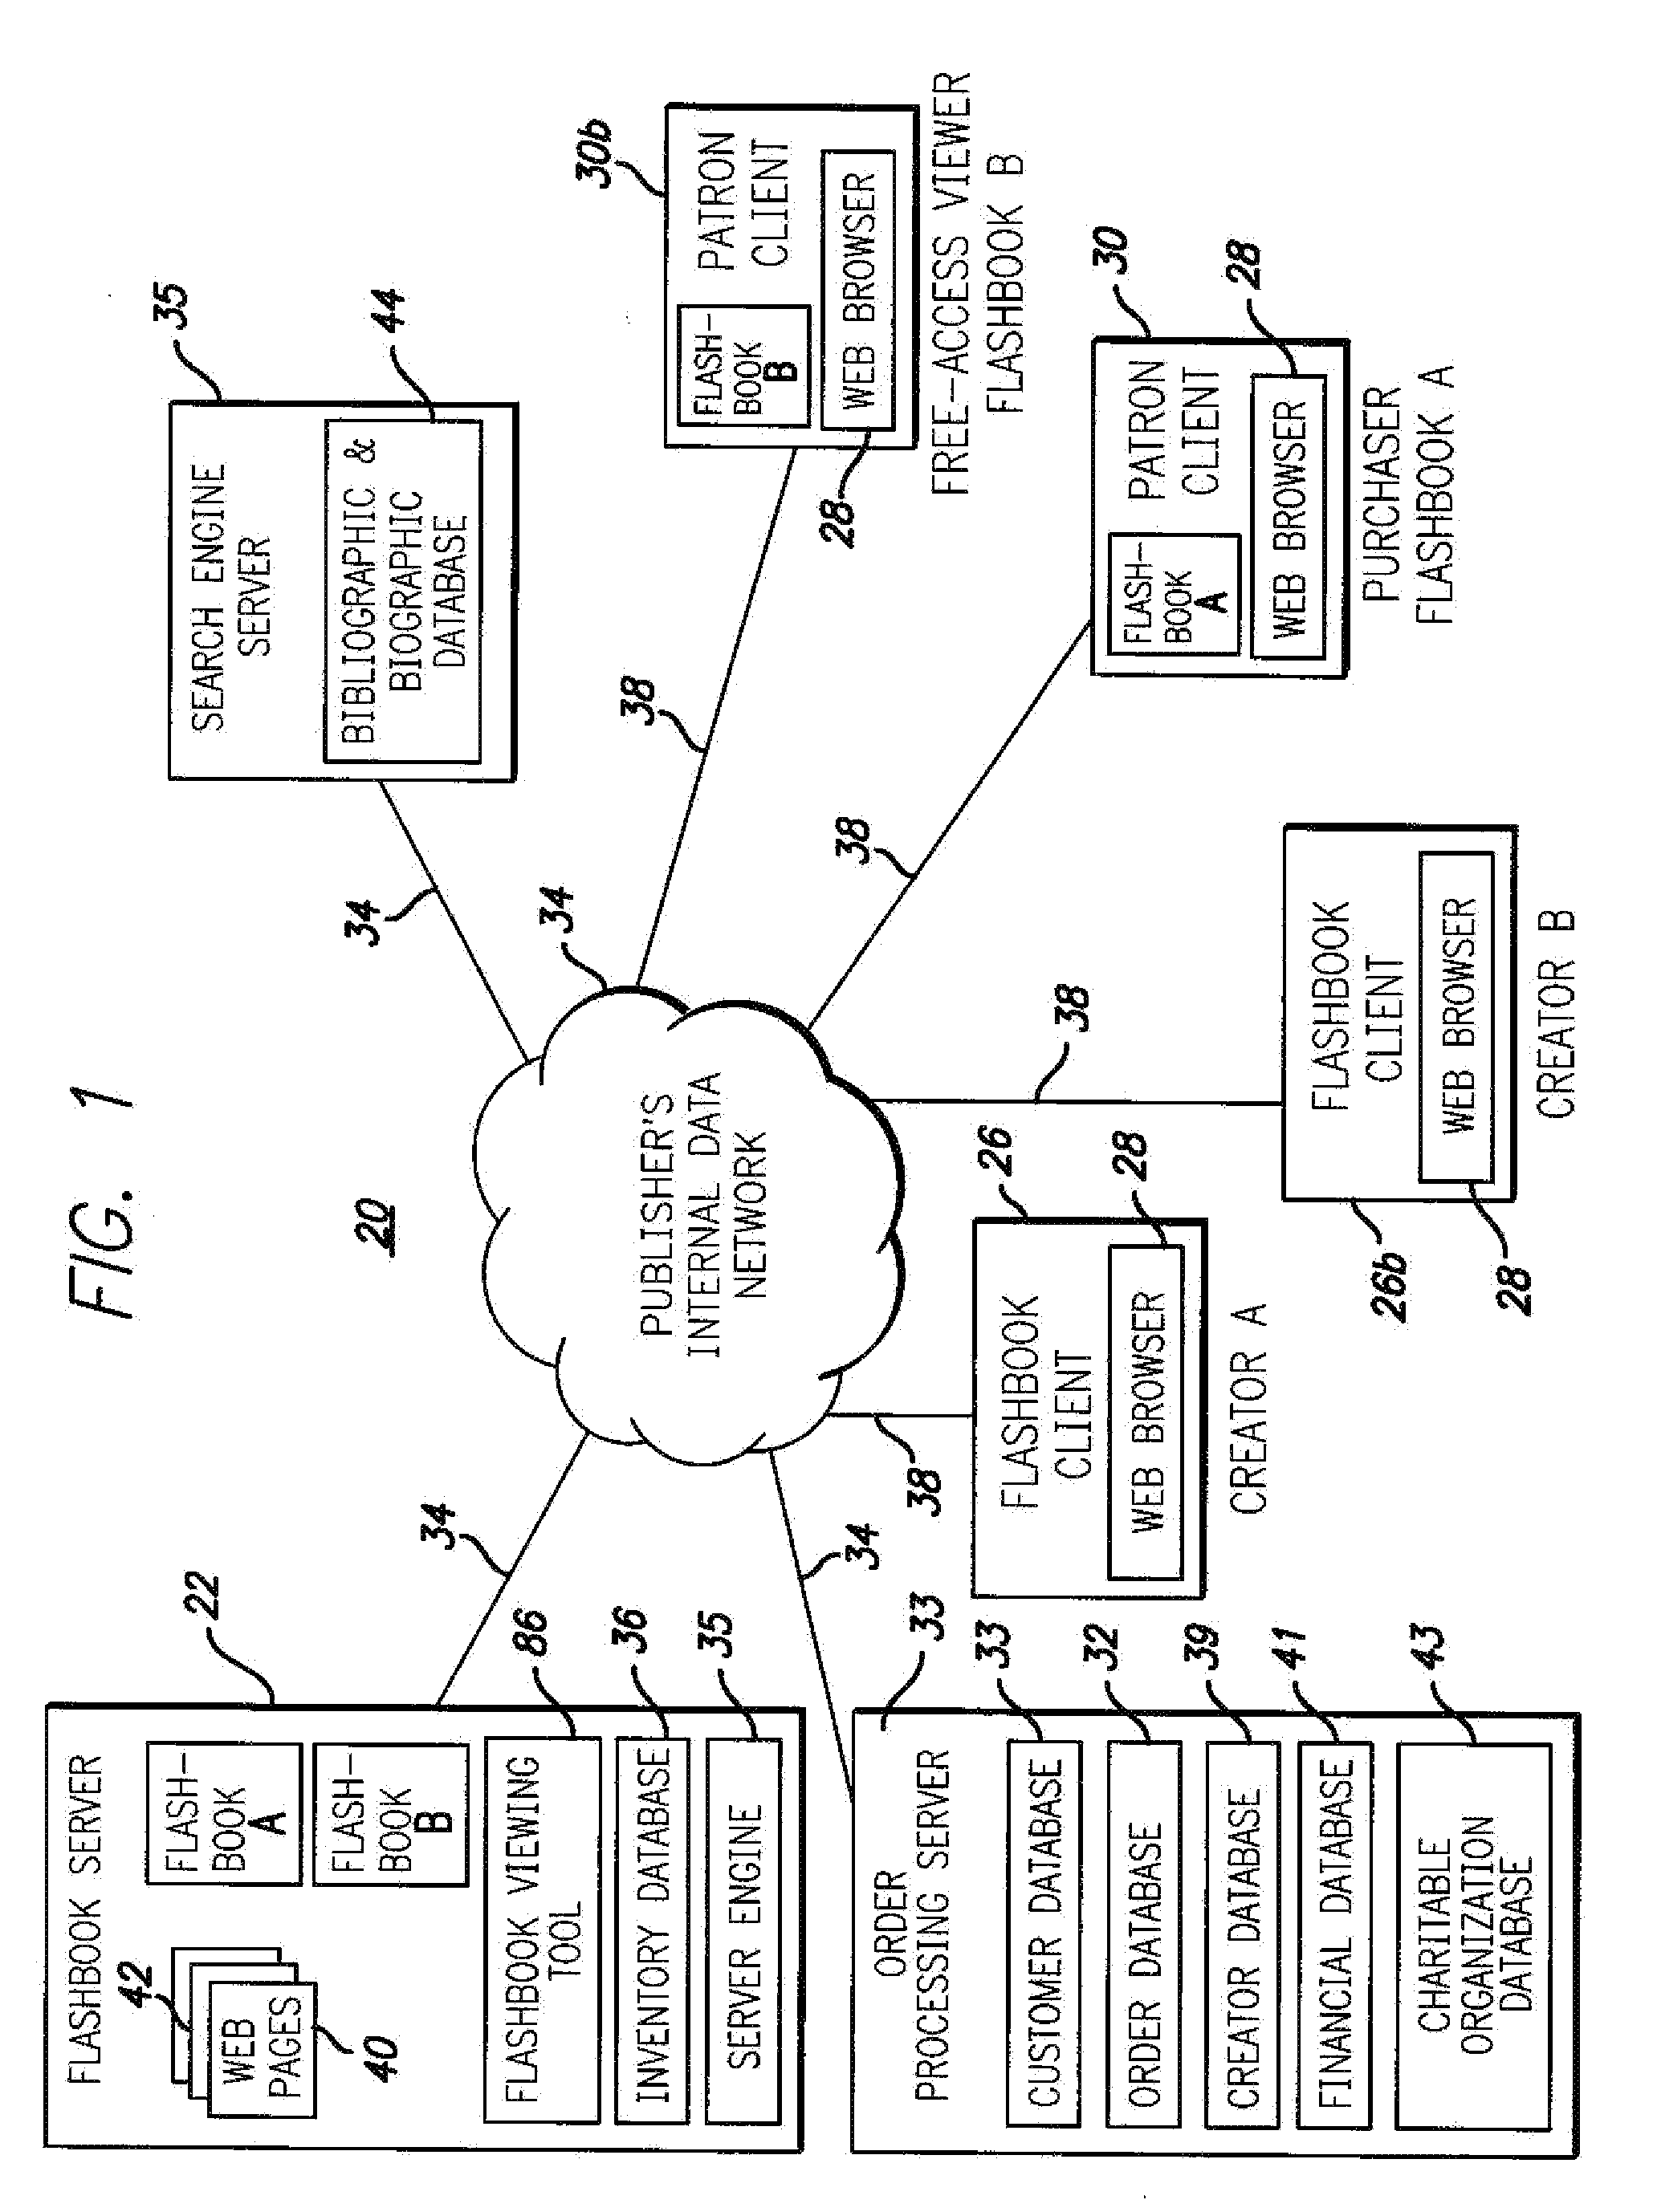 System and Method For Electronic Publication and Fund Raising